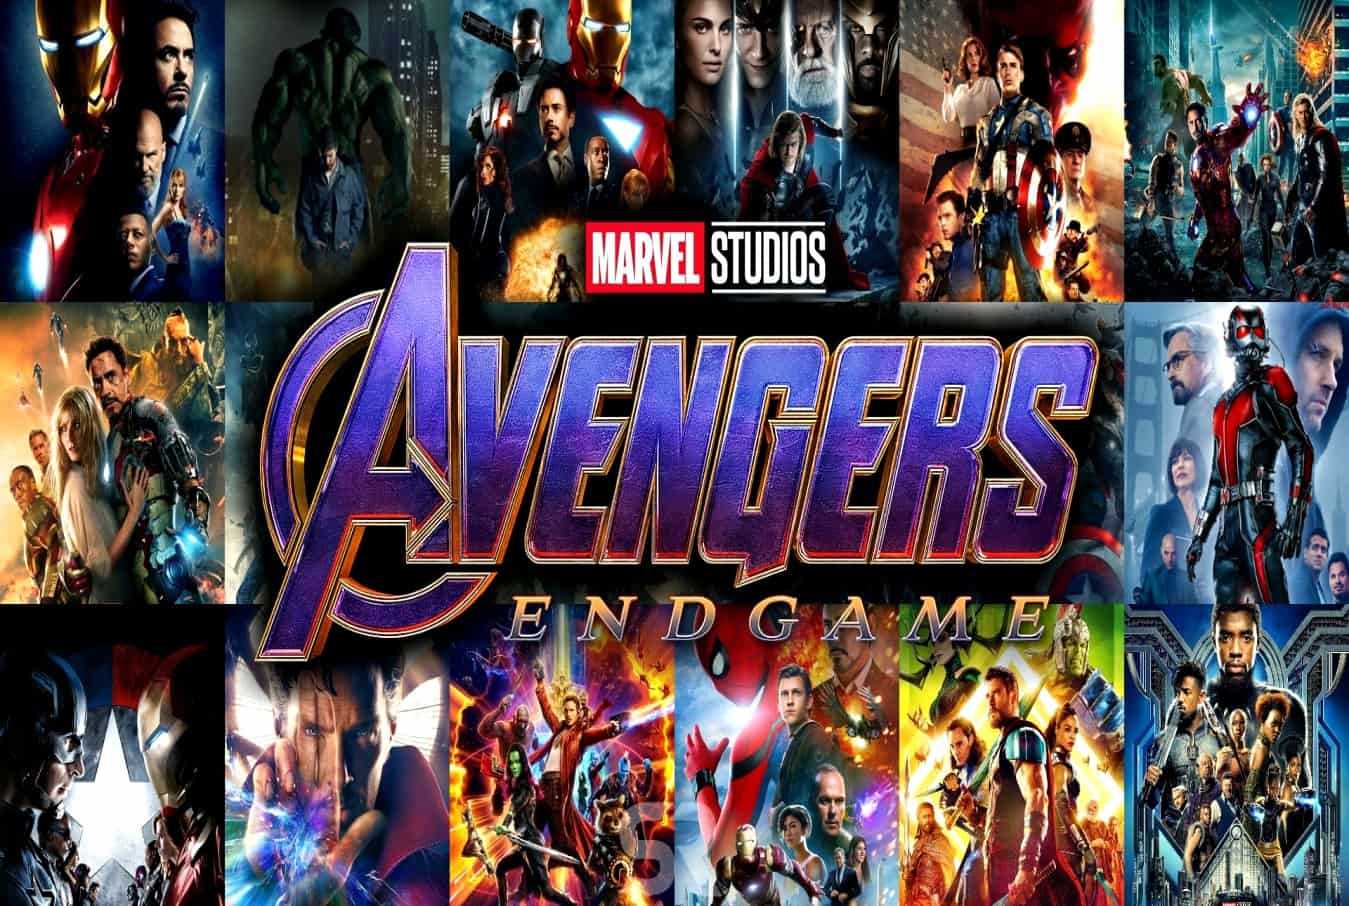 Avengers: End Game leaked online soon after releasing in China